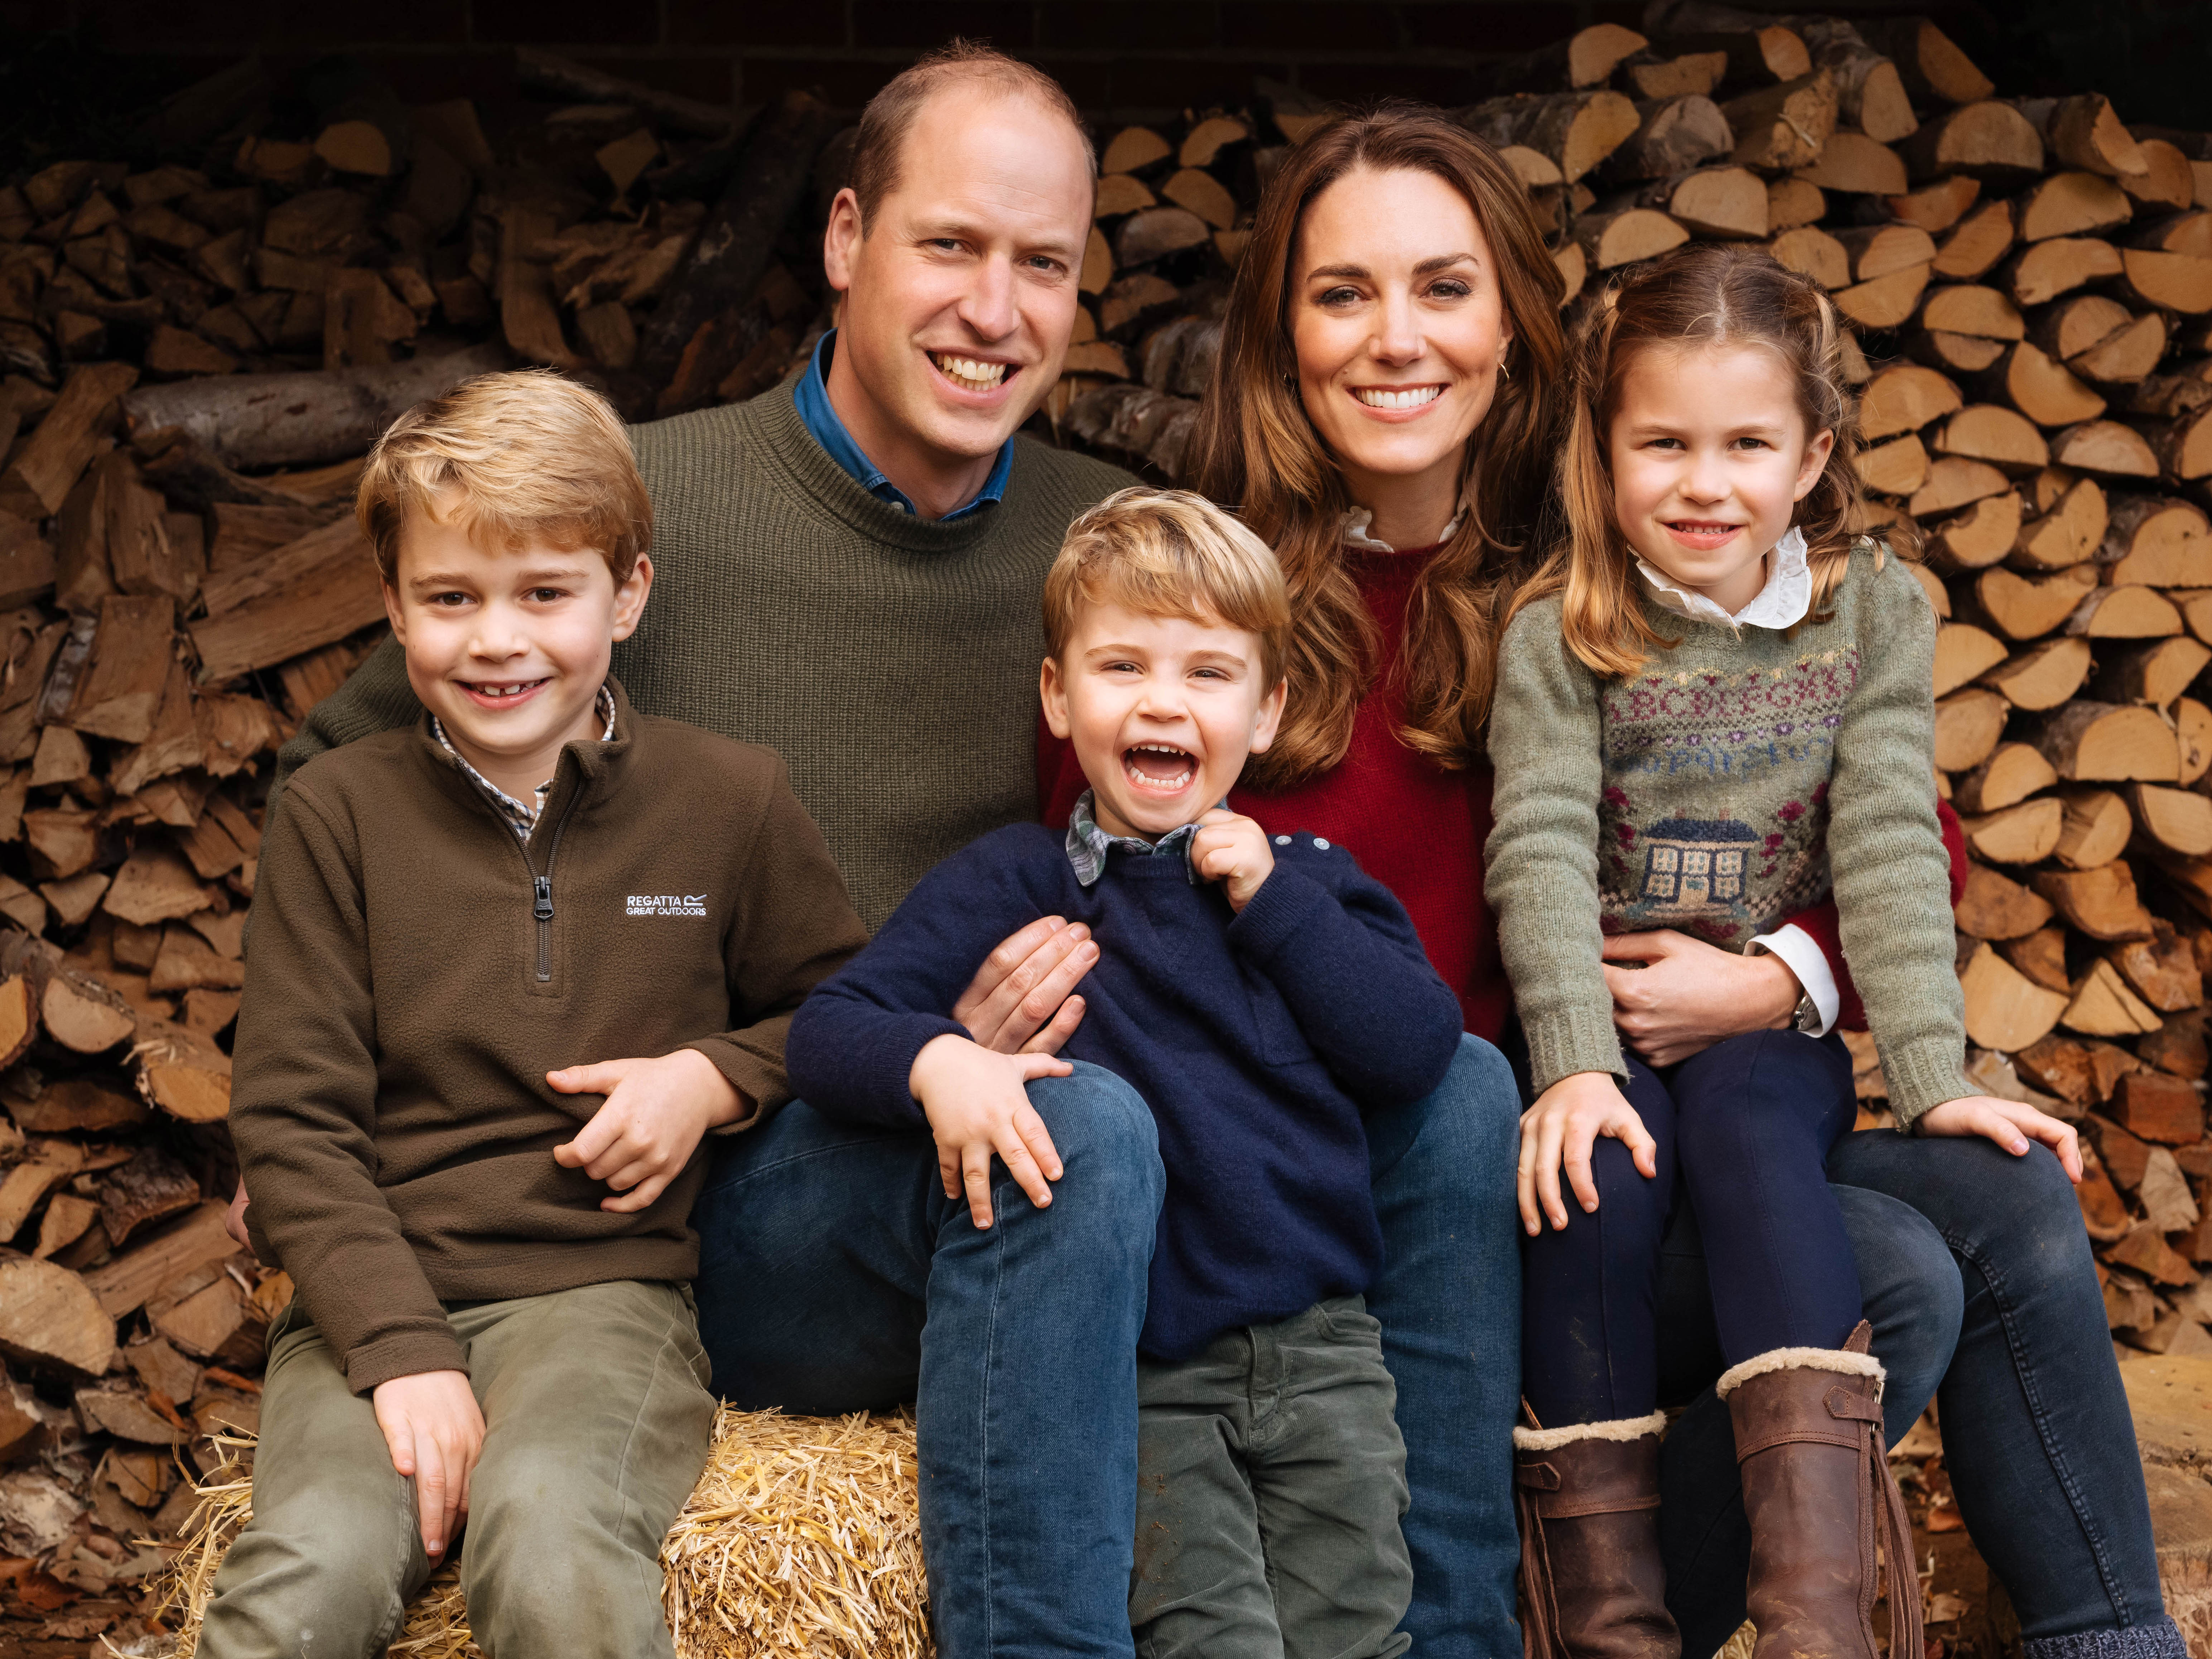 Prince William, Duke of Cambridge and Catherine, Duchess of Cambridge with their three children Prince George (left), Princess Charlotte (right) and Prince Louis at Anmer Hall in Norfolk. | Source: Getty Images